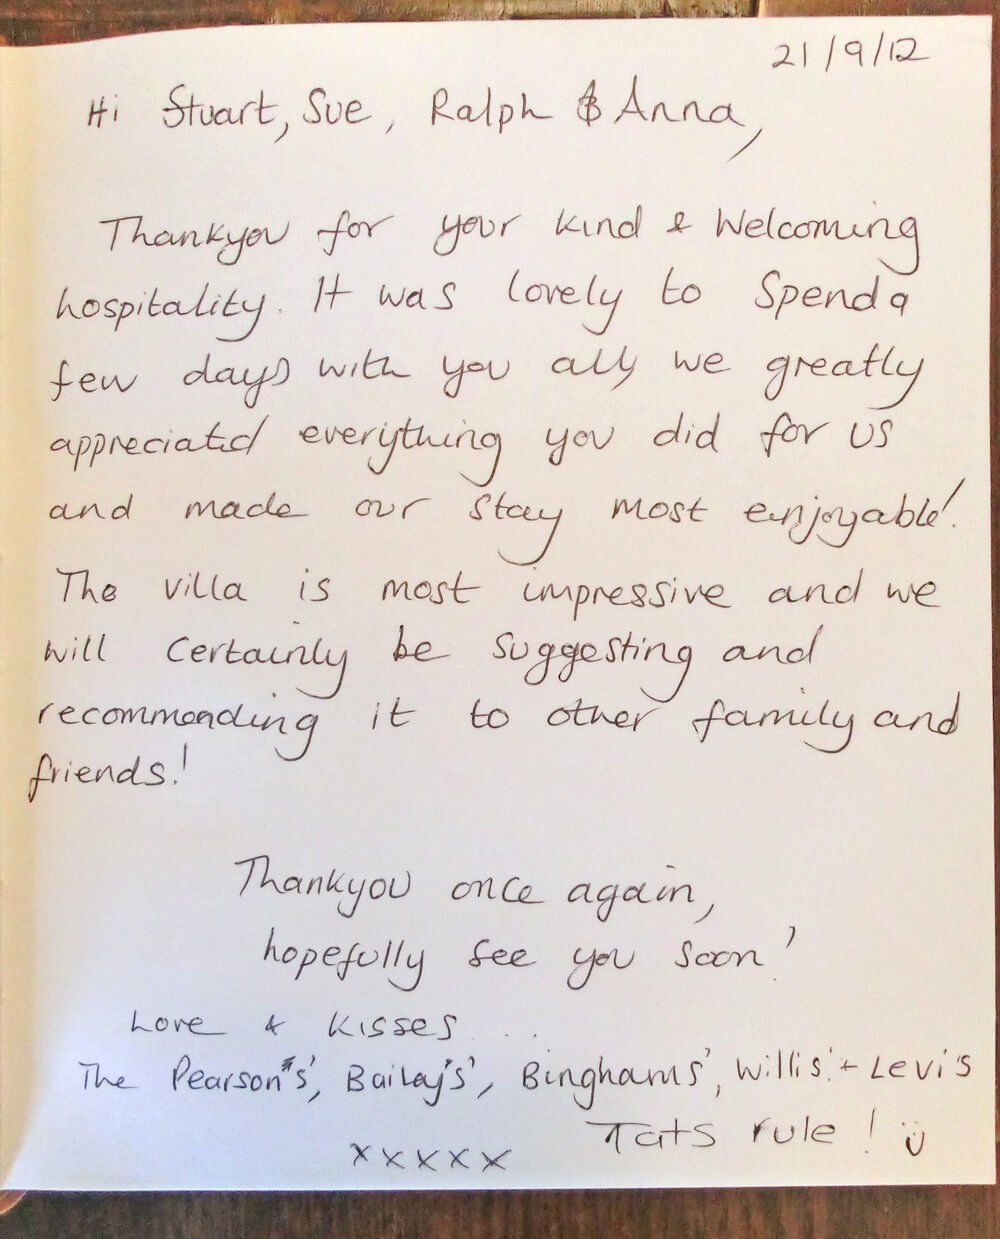 Hospitality Thank You Notes Unique Thank You for Your Kind and Wel Ing Hospitality Lisbon